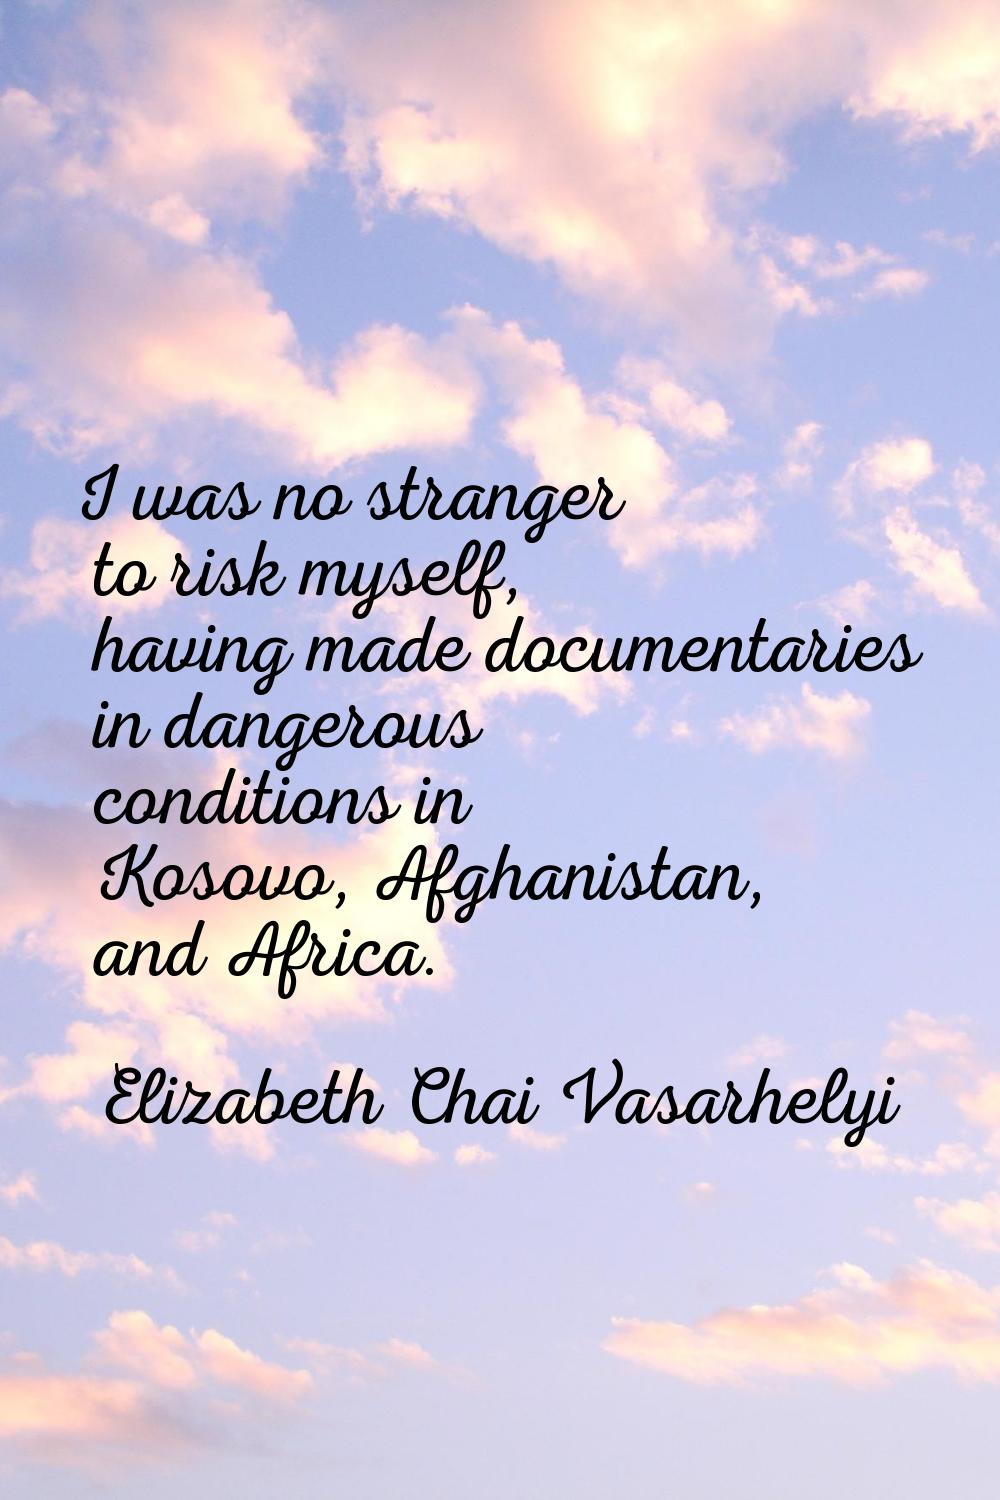 I was no stranger to risk myself, having made documentaries in dangerous conditions in Kosovo, Afgh